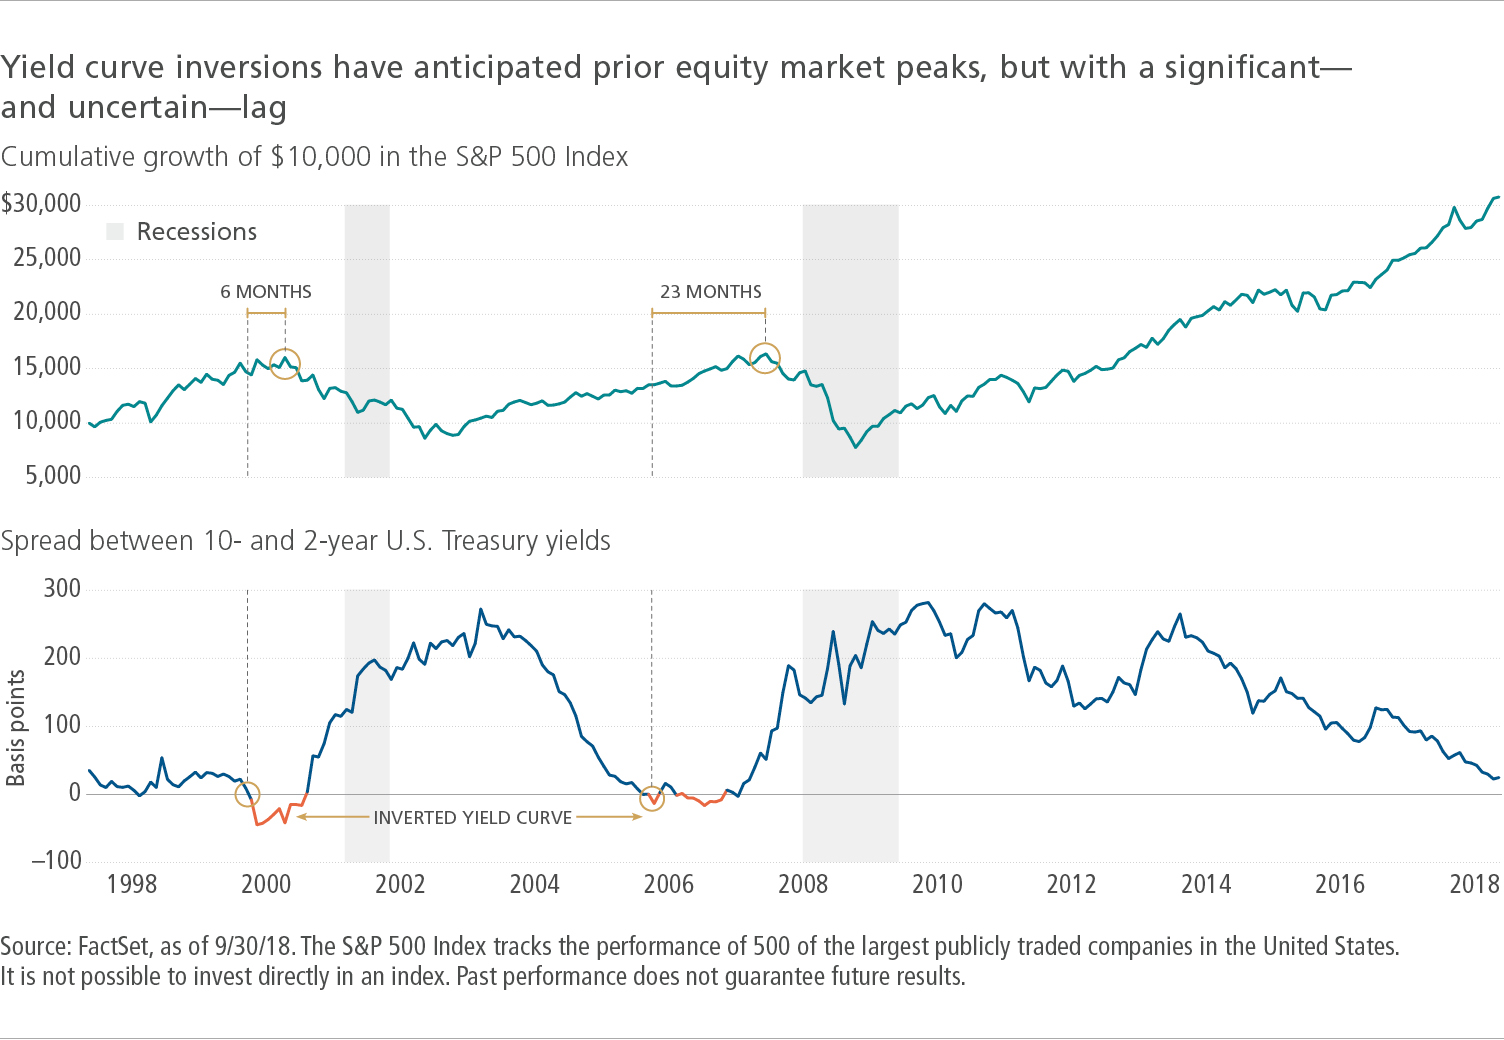 Yield curve inversions have anticipated prior equity market peaks, but with a significant—and uncertain—lag